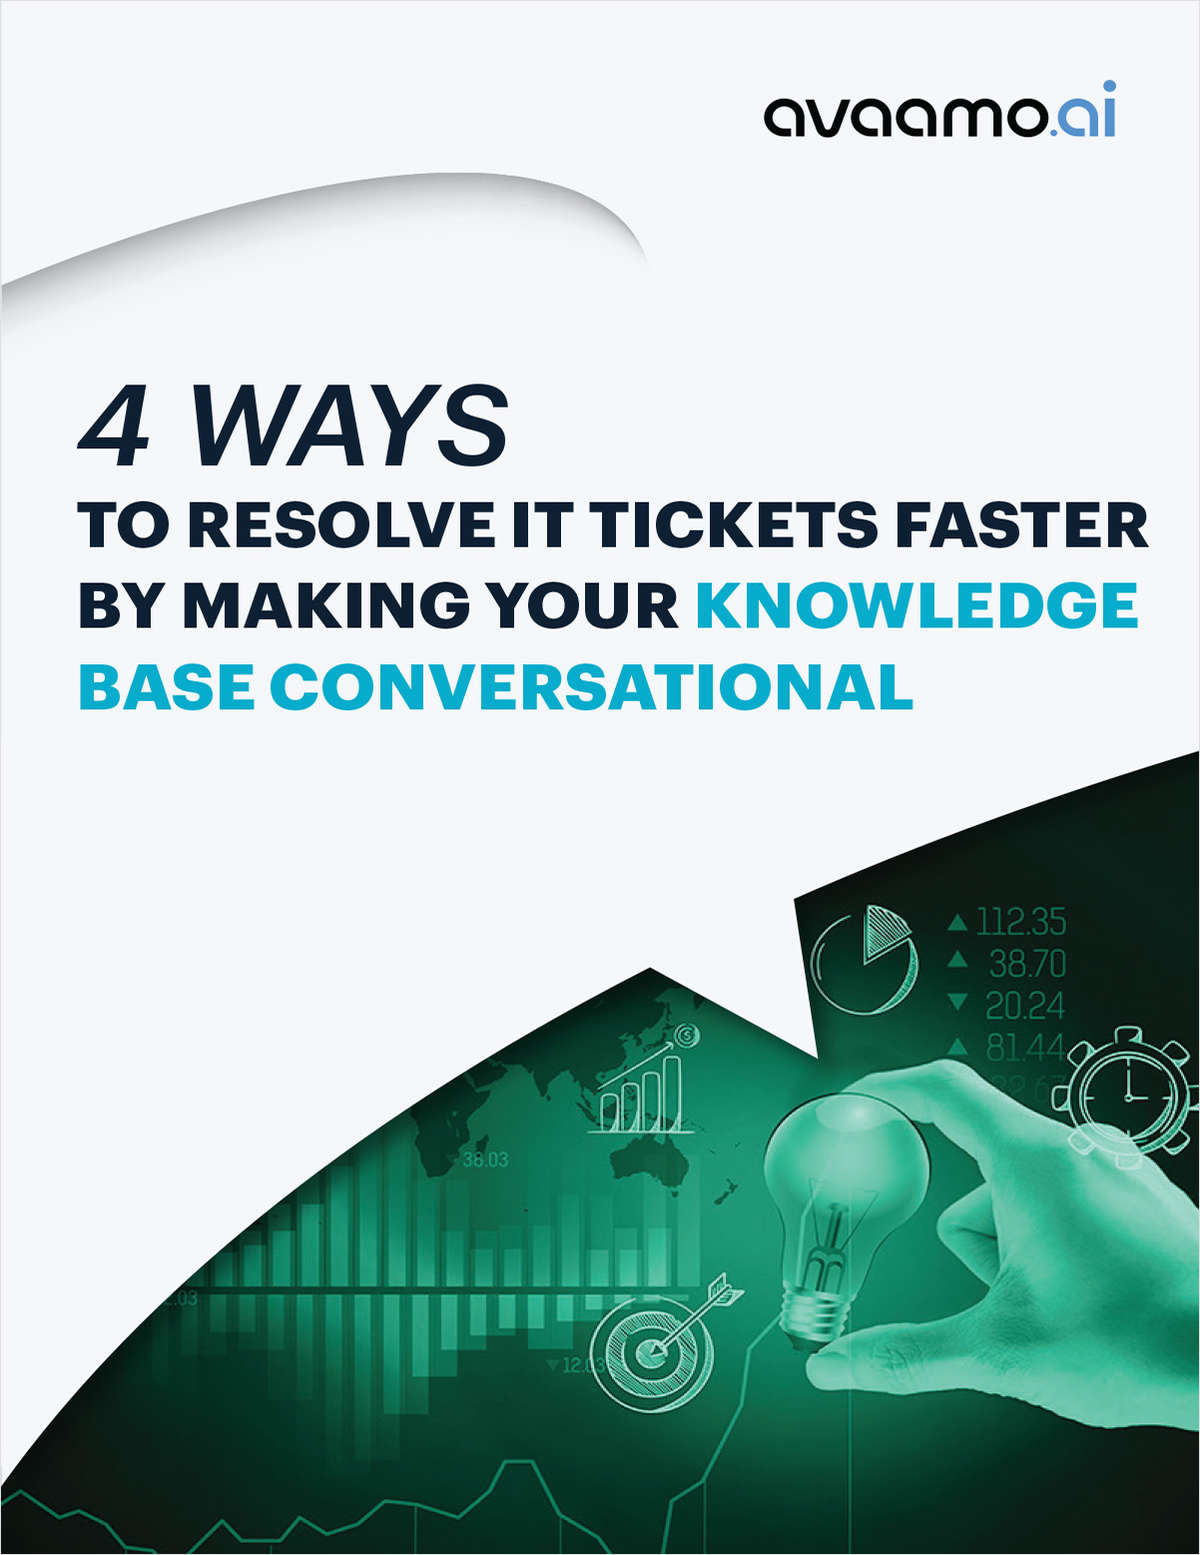 4 Ways to Resolve IT Tickets Faster by Making Your Knowledge Base Conversational